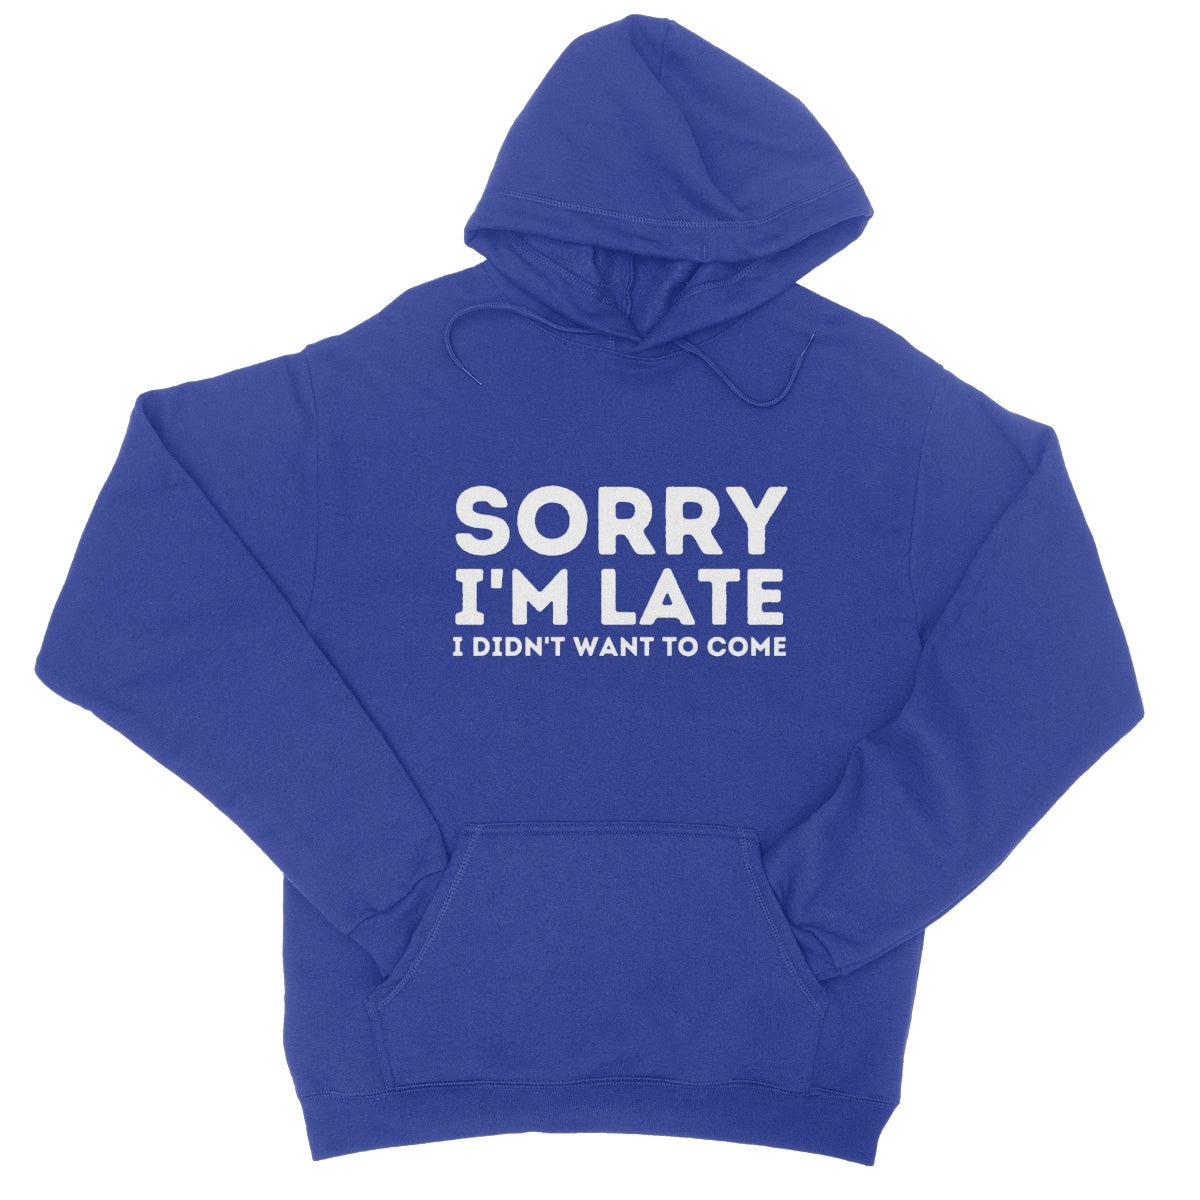 sorry I'm late I didn't want to come hoodie blue